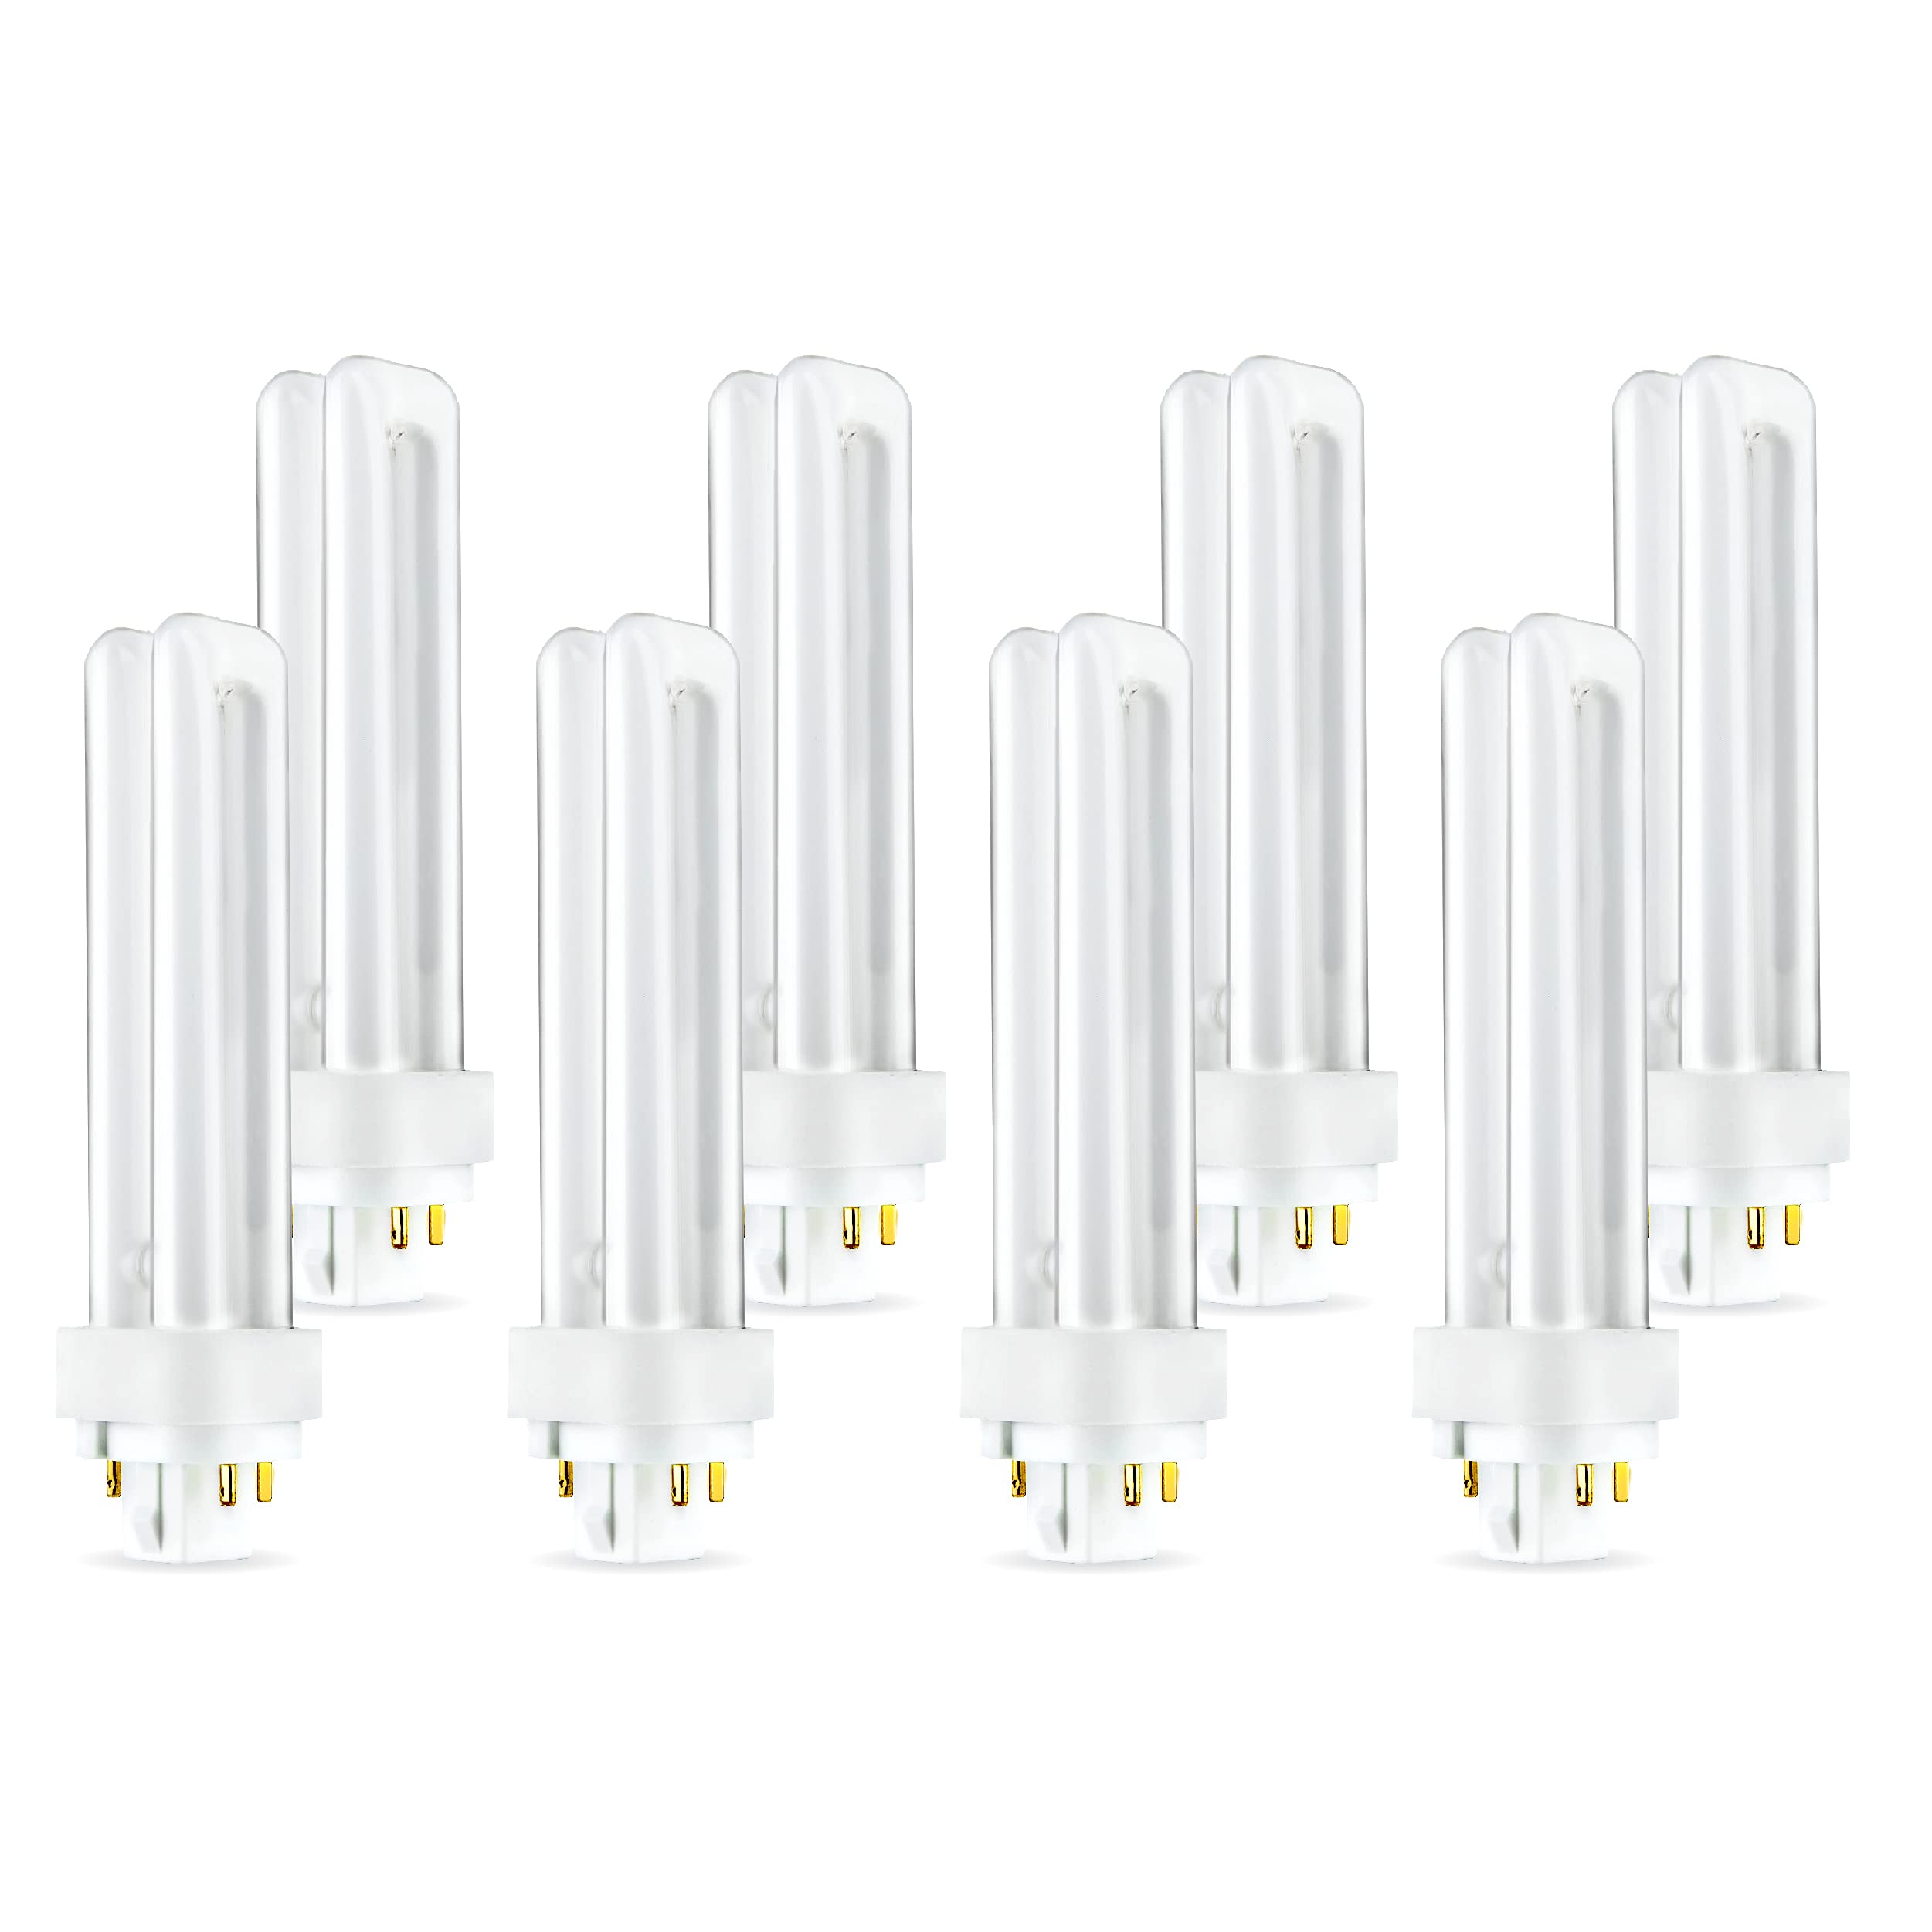 (8 Pack) PLC-13W 835, 4 Pin G24q-1, 13 Watt Double Tube, Compact Fluorescent Light Bulb, Replaces Philips 38327-3, GE 97596 and Sylvania 20671  - Good